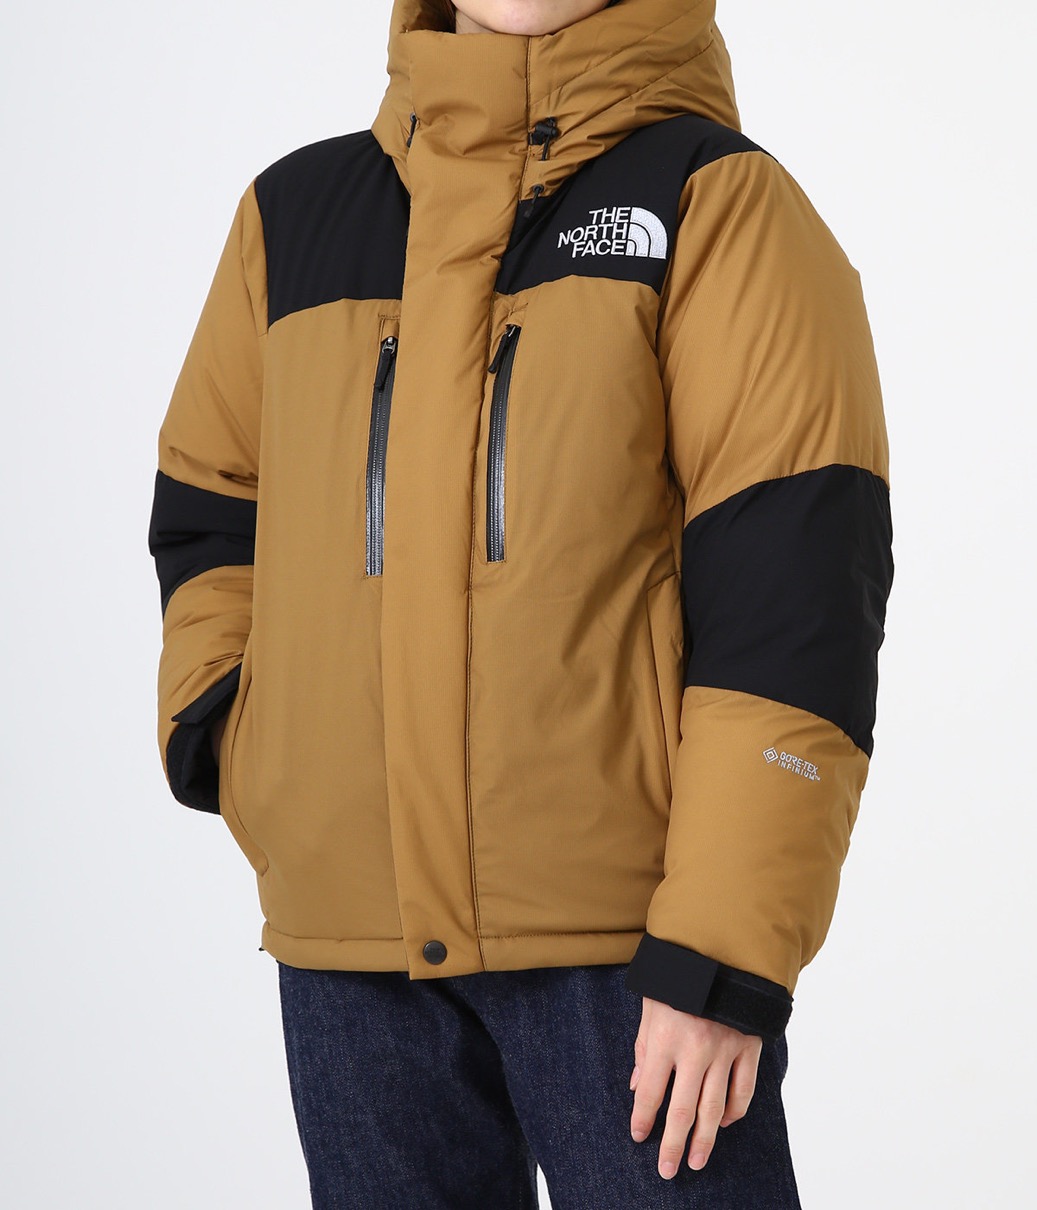 The North Face】2021FW バルトロライトジャケットの発売情報まとめ【予約・販売店舗随時更新中】 UP TO DATE